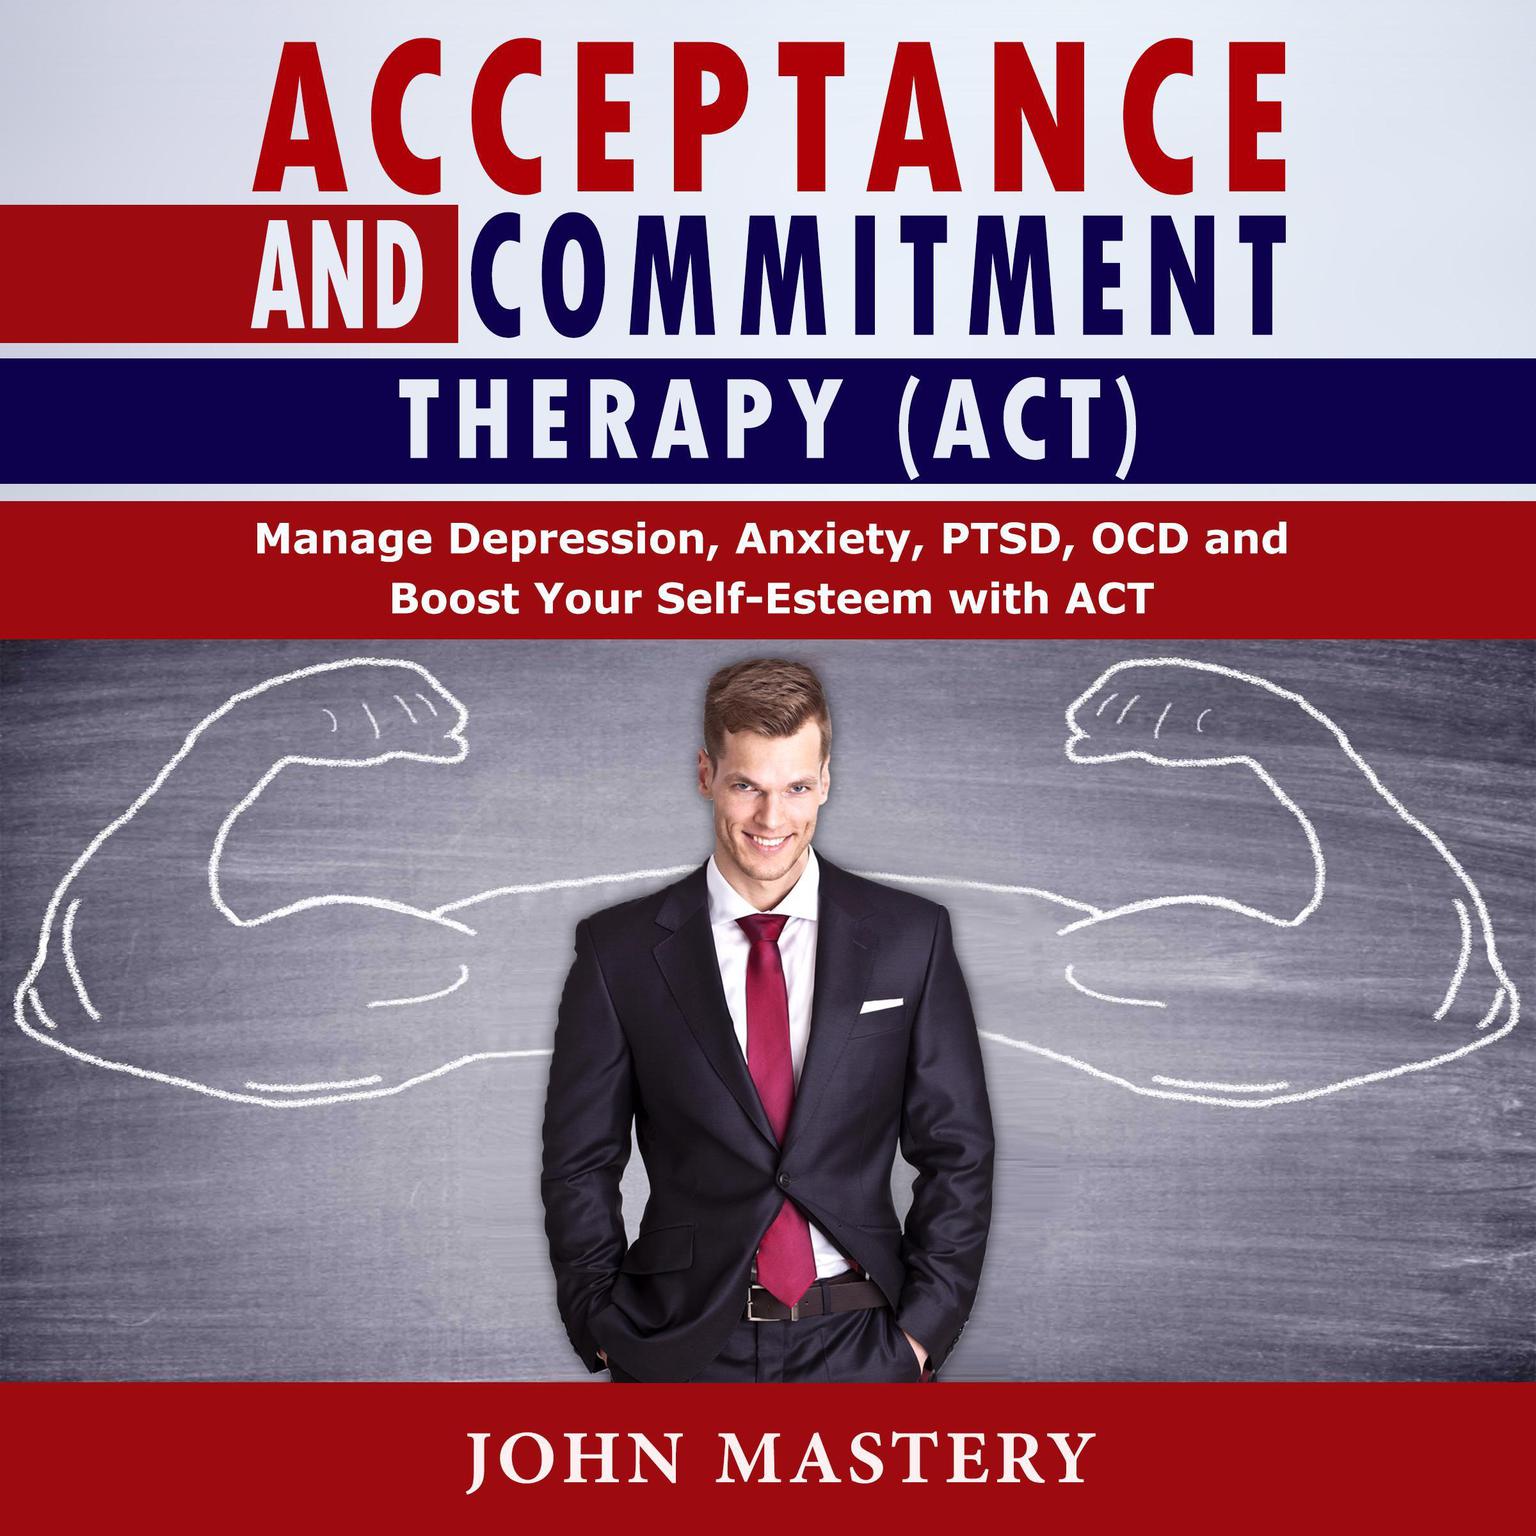 Acceptance and Commitment Therapy (ACT): Manage Depression, Anxiety, PTSD, OCD and Boost Your Self-Esteem with ACT. Handle Painful Feelings and Create a Meaningful Life, Becoming More Flexible, Effective and Fulfilled Audiobook, by John Mastery